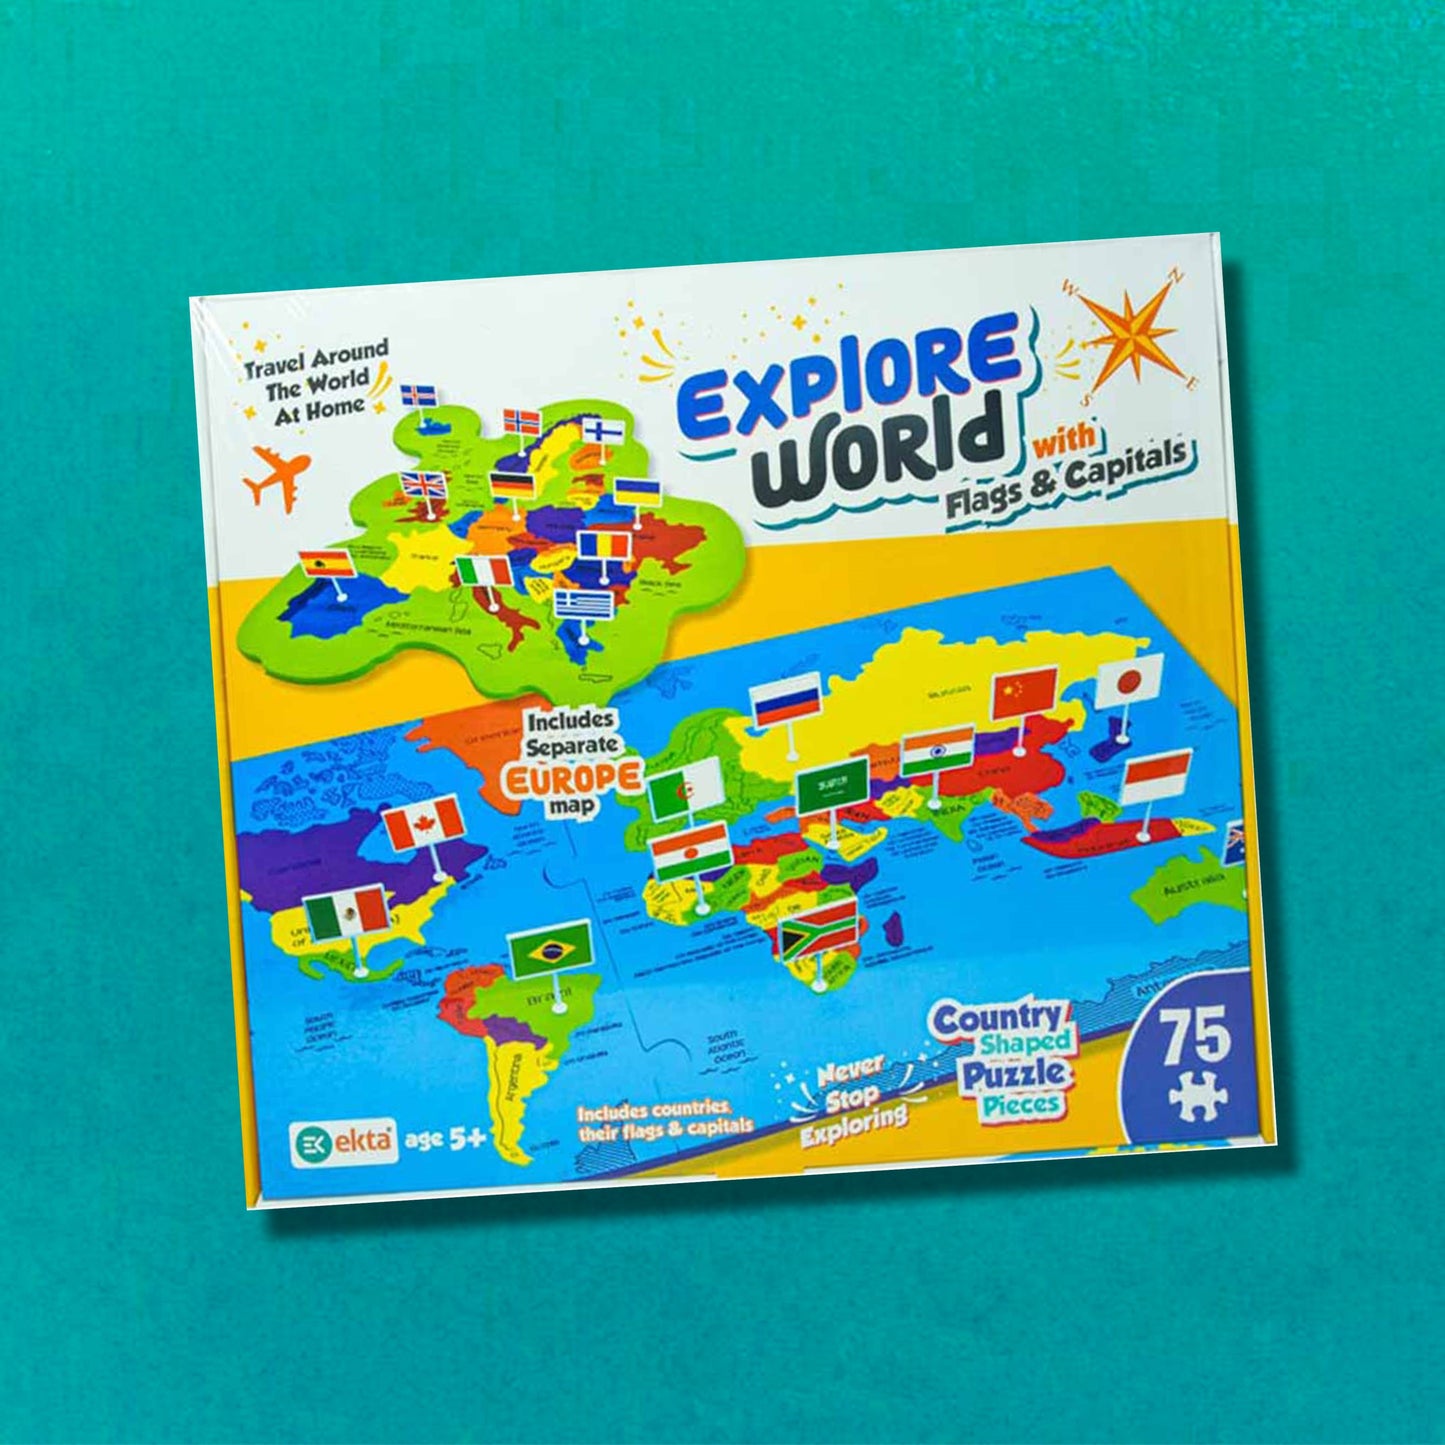 Explore World With Flags & Capitals - Kids